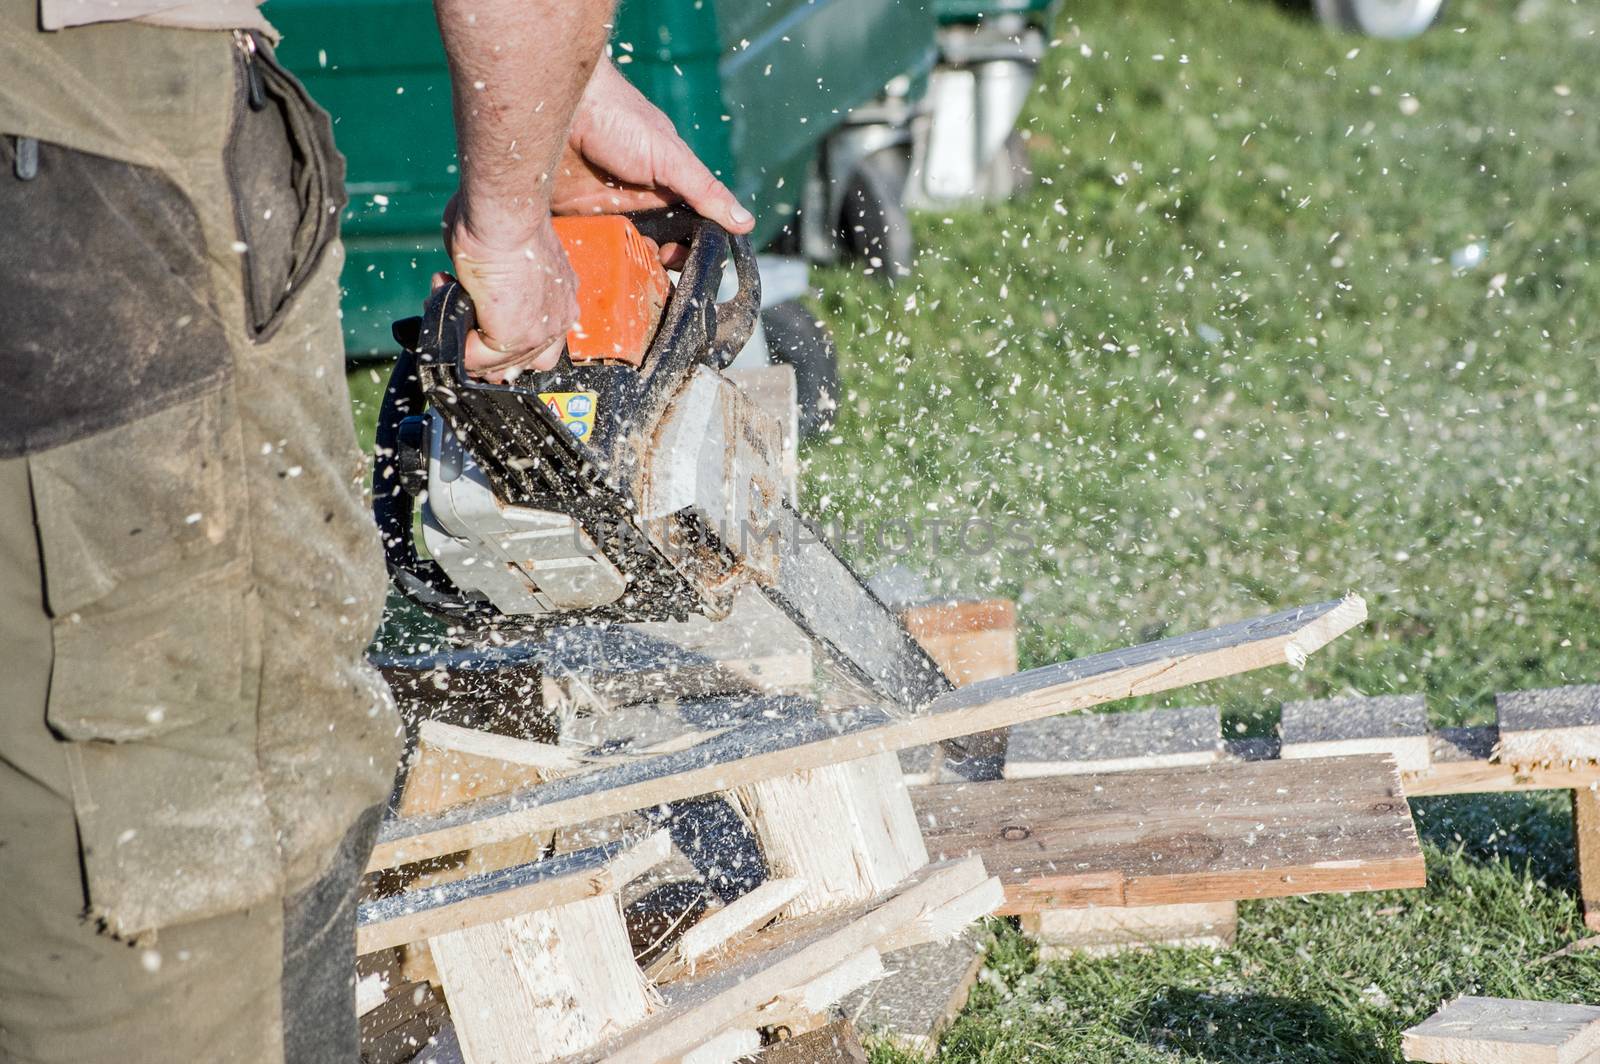 A man using a chainsaw to cut through wooden pallets with sawdust spraying .